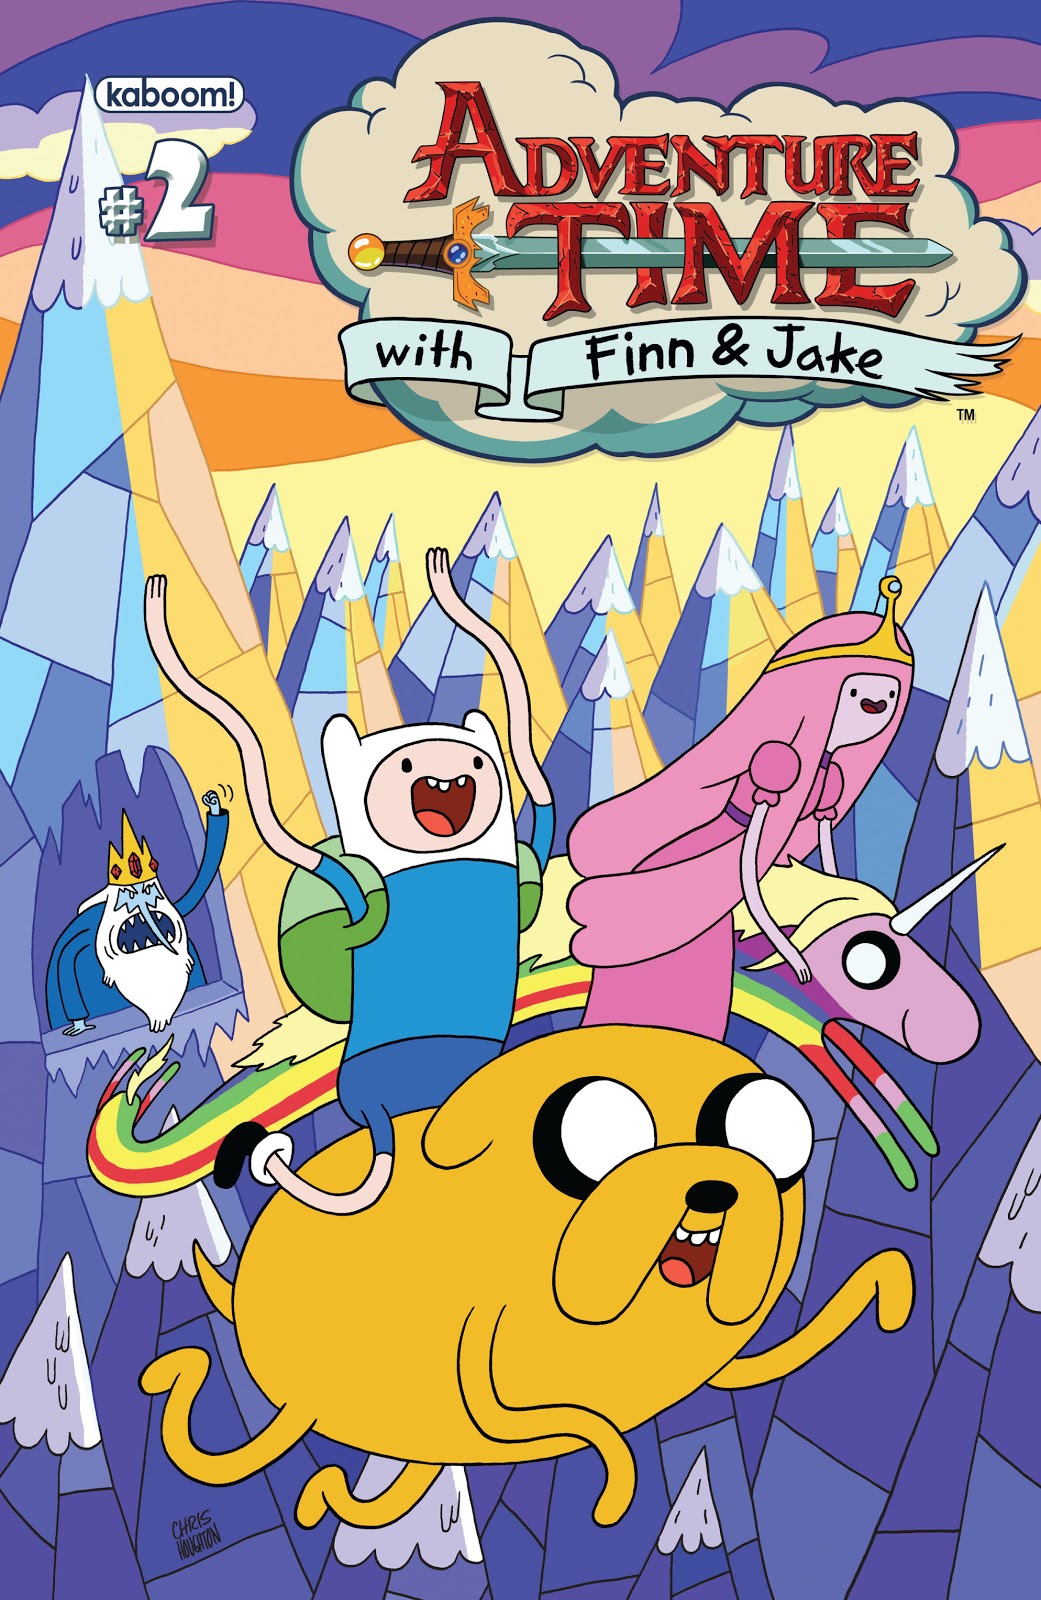 Adventure Time with Fionna and Cake Issue 3, Adventure Time Wiki, Fandom